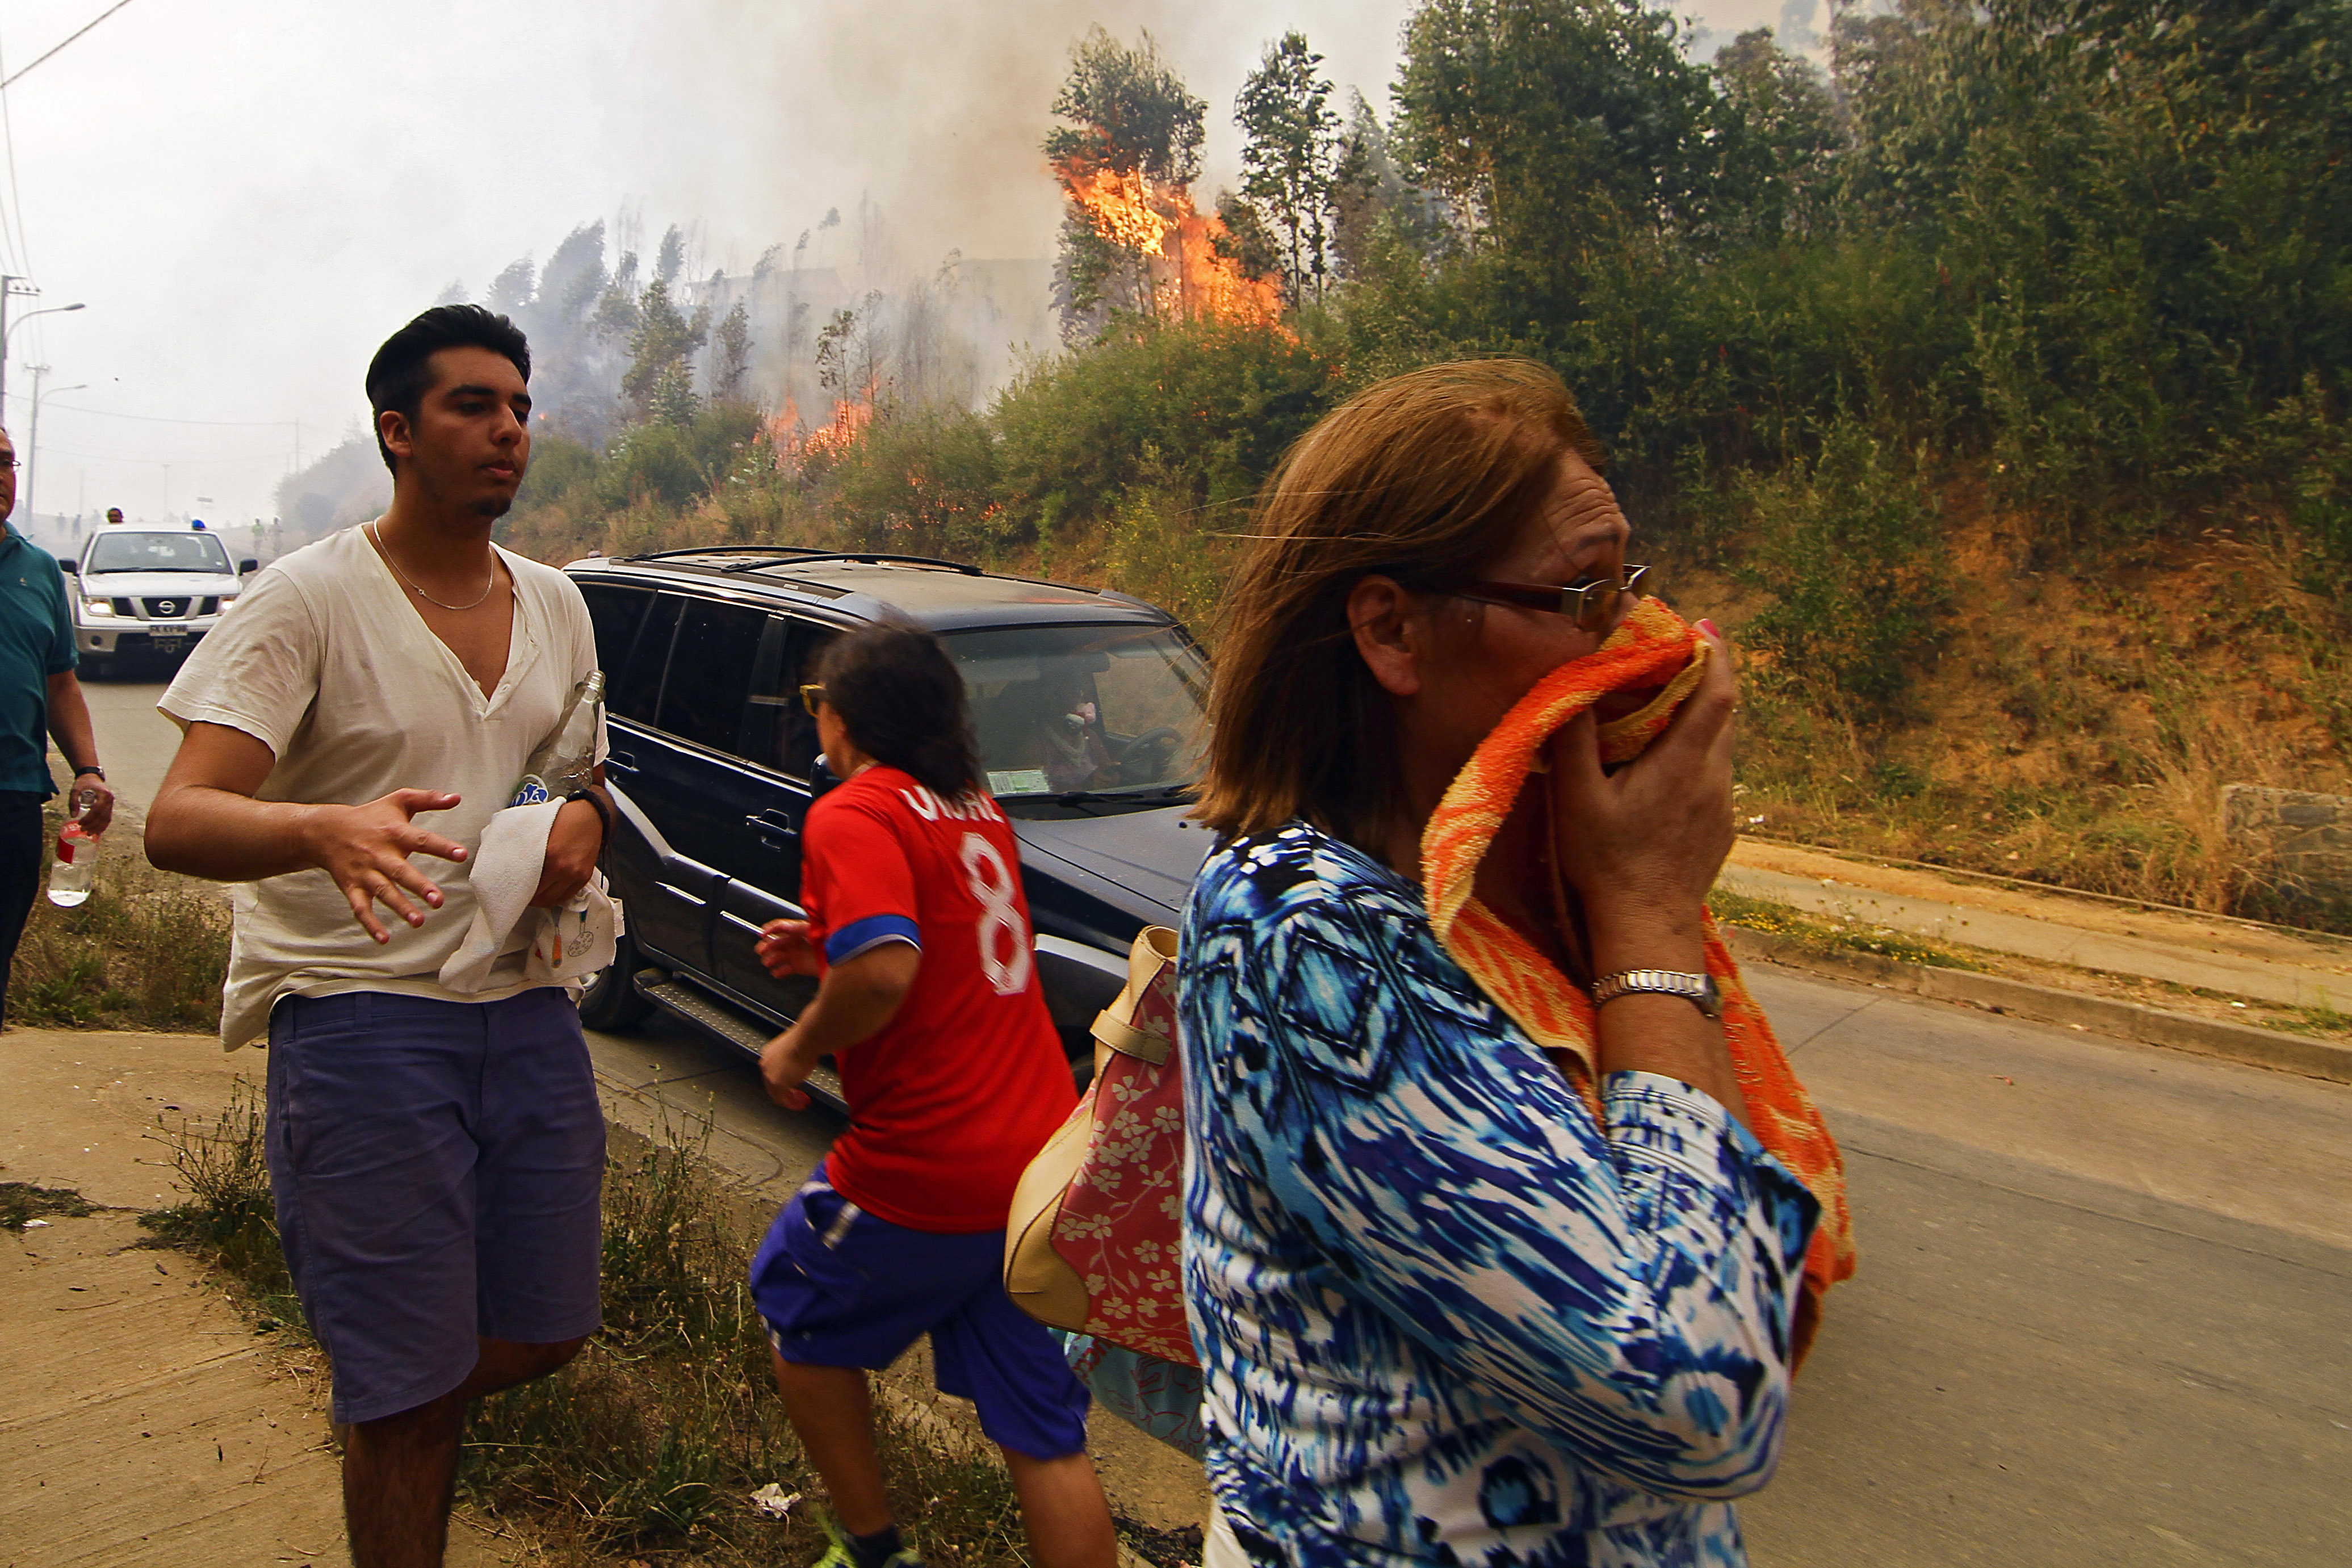 People react to the advancement of a forest fire in Hualañe, a community in Concepcion, Chile, Wednesday, Jan. 25, 2017. The worst forest fires in Chile's history were uncontrolled on Wednesday, killing a firefighter and two policemen caught in the flames as they tried to help families in rural communities, authorities said. (Alejandro Zoñez/Aton via AP) NO PUBLICAR EN CHILE